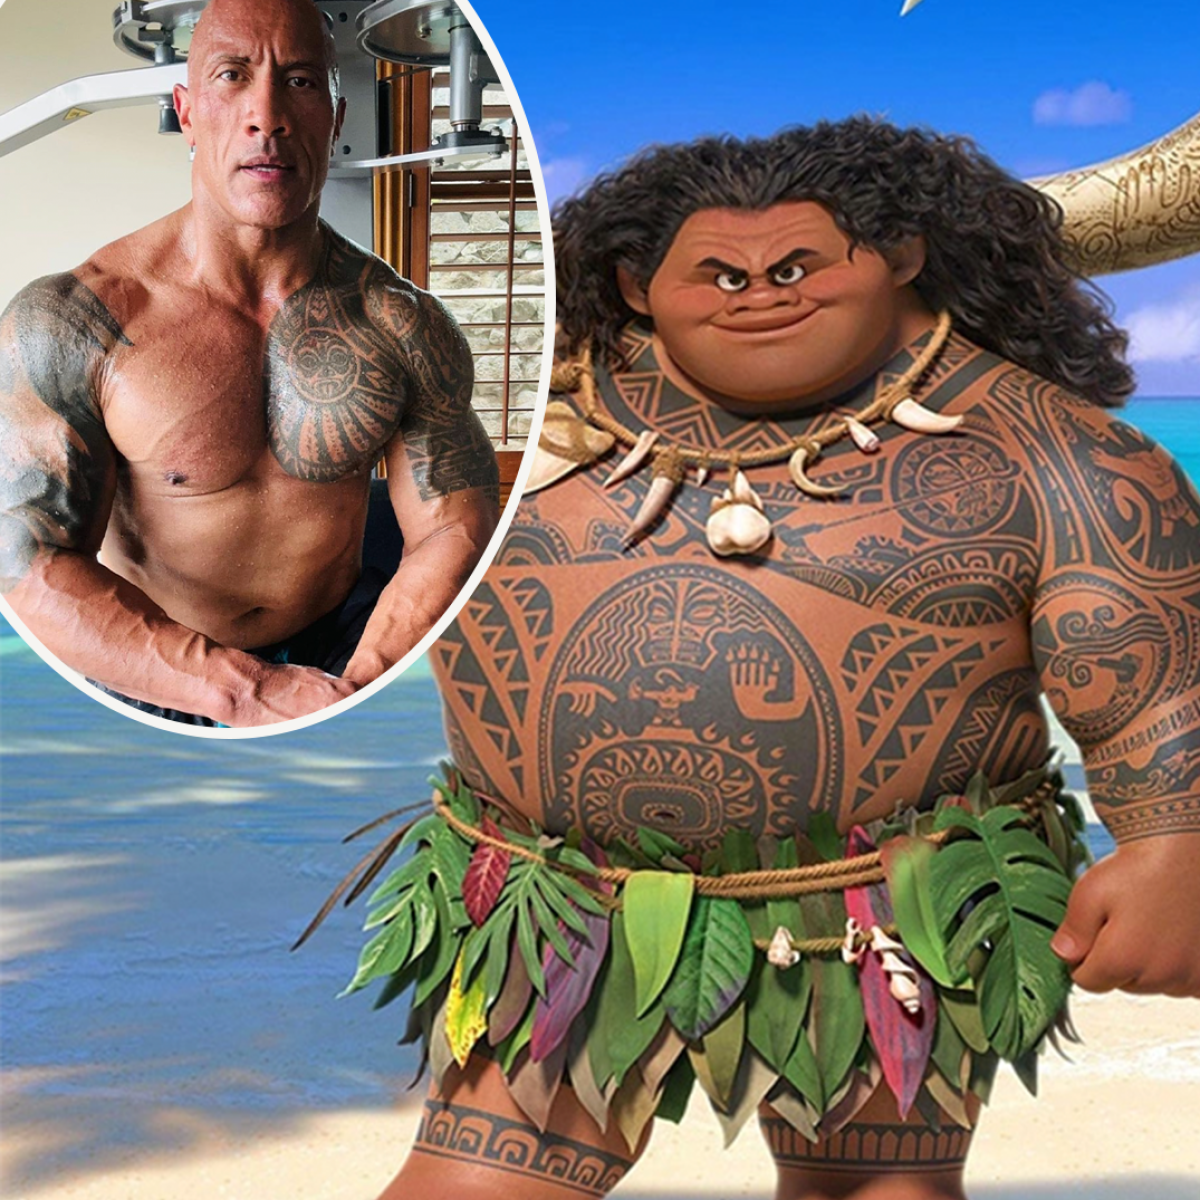 The Rock returning as Maui in live action 'Moana' movie - 2EC